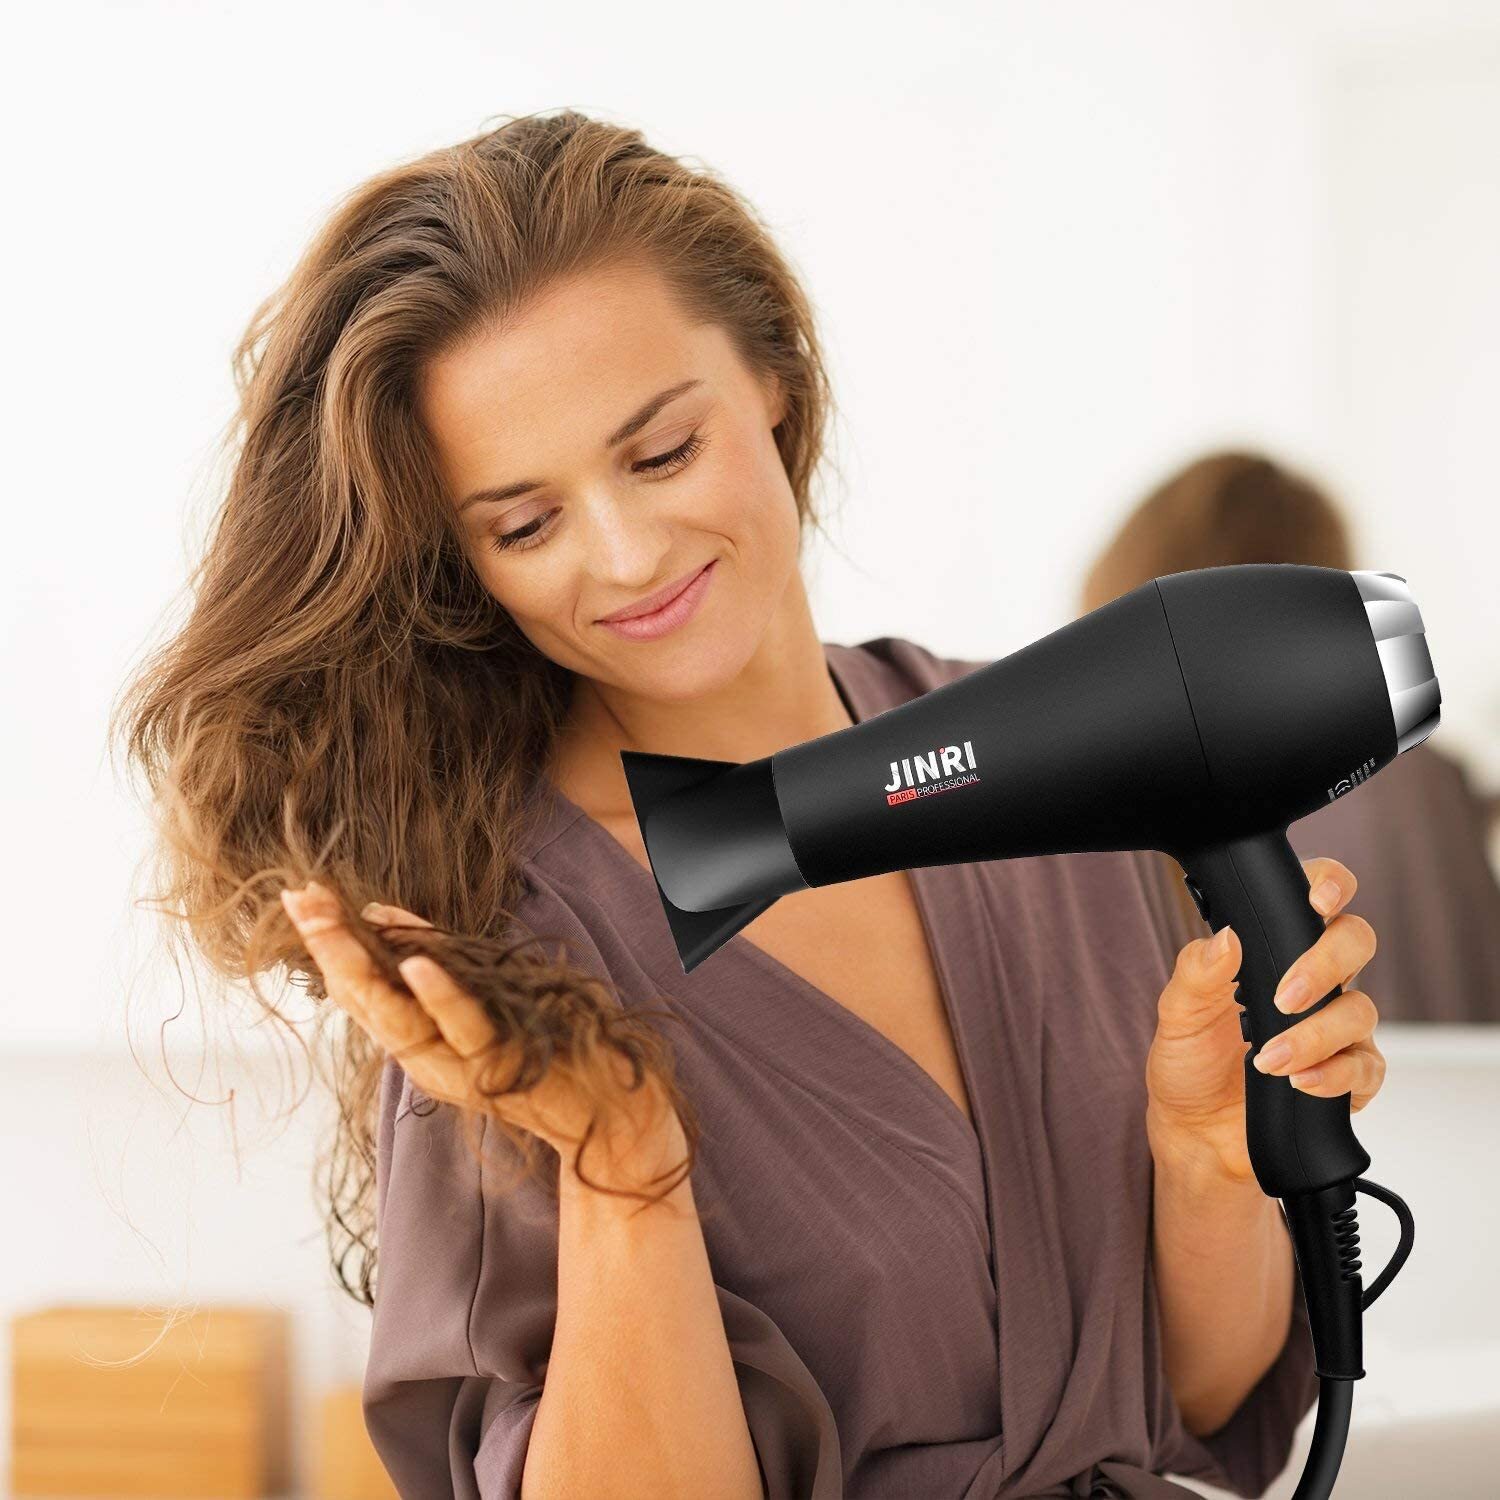 Hair Dryer With Diffuser For Curls Test Winner With Negative Ions Hair Dryer 3 Heating And 2 Separate Blower Levels Cooling Level 1800w Hairdryer With Diffuser For Curls Design Styling Nozzles 2 Attachments Black